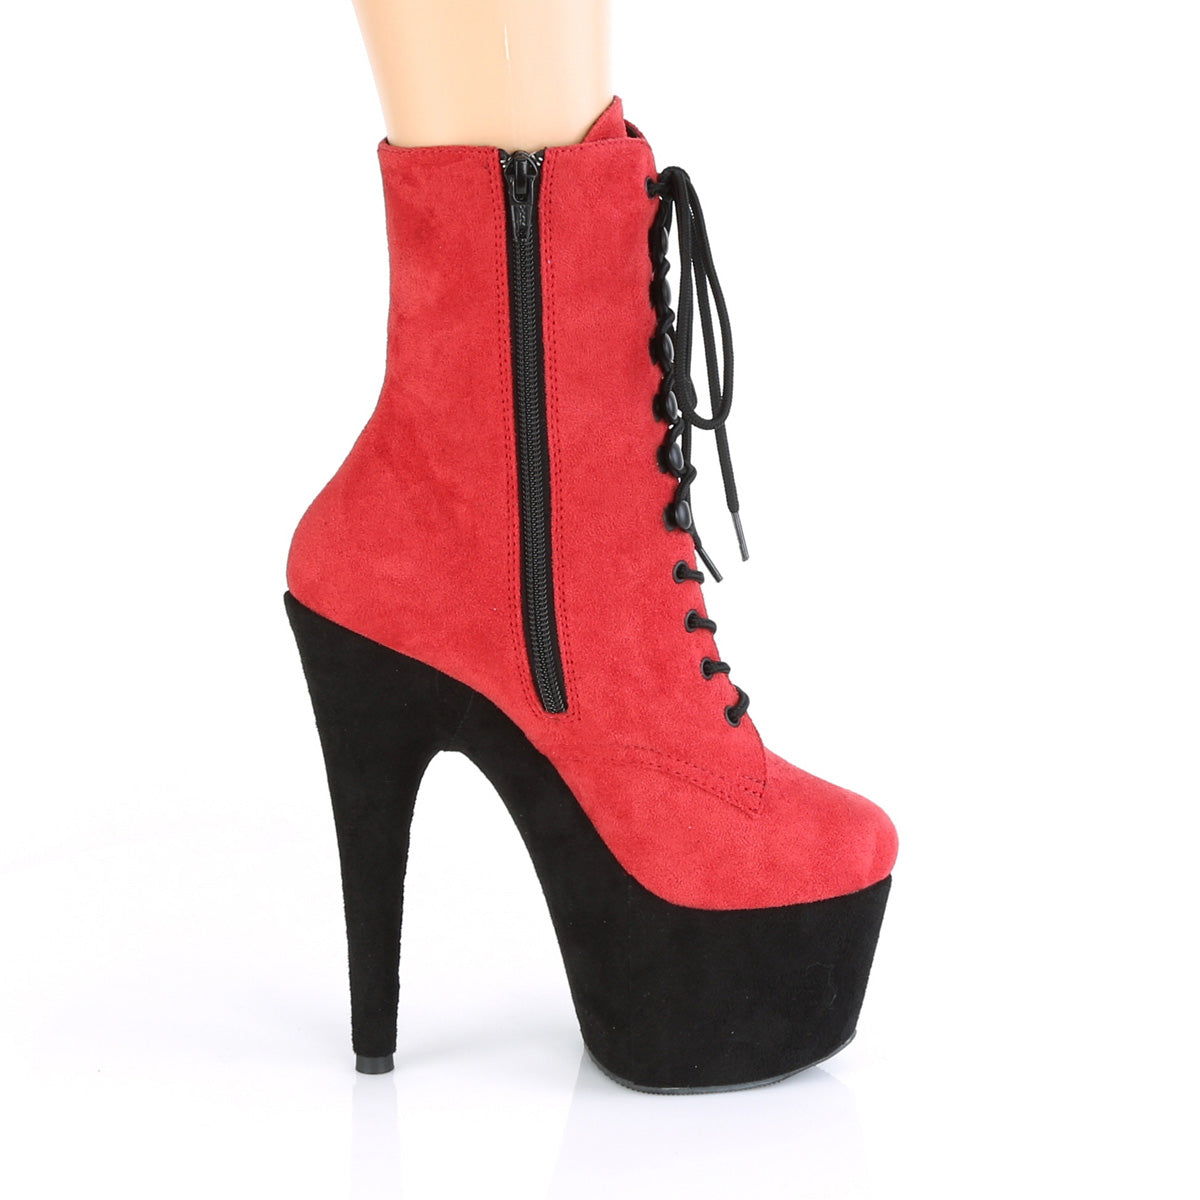 ADORE-1020FSTT Pleaser 7" Heel Red Exotic Dancing Ankle Boot-Pleaser- Sexy Shoes Fetish Heels